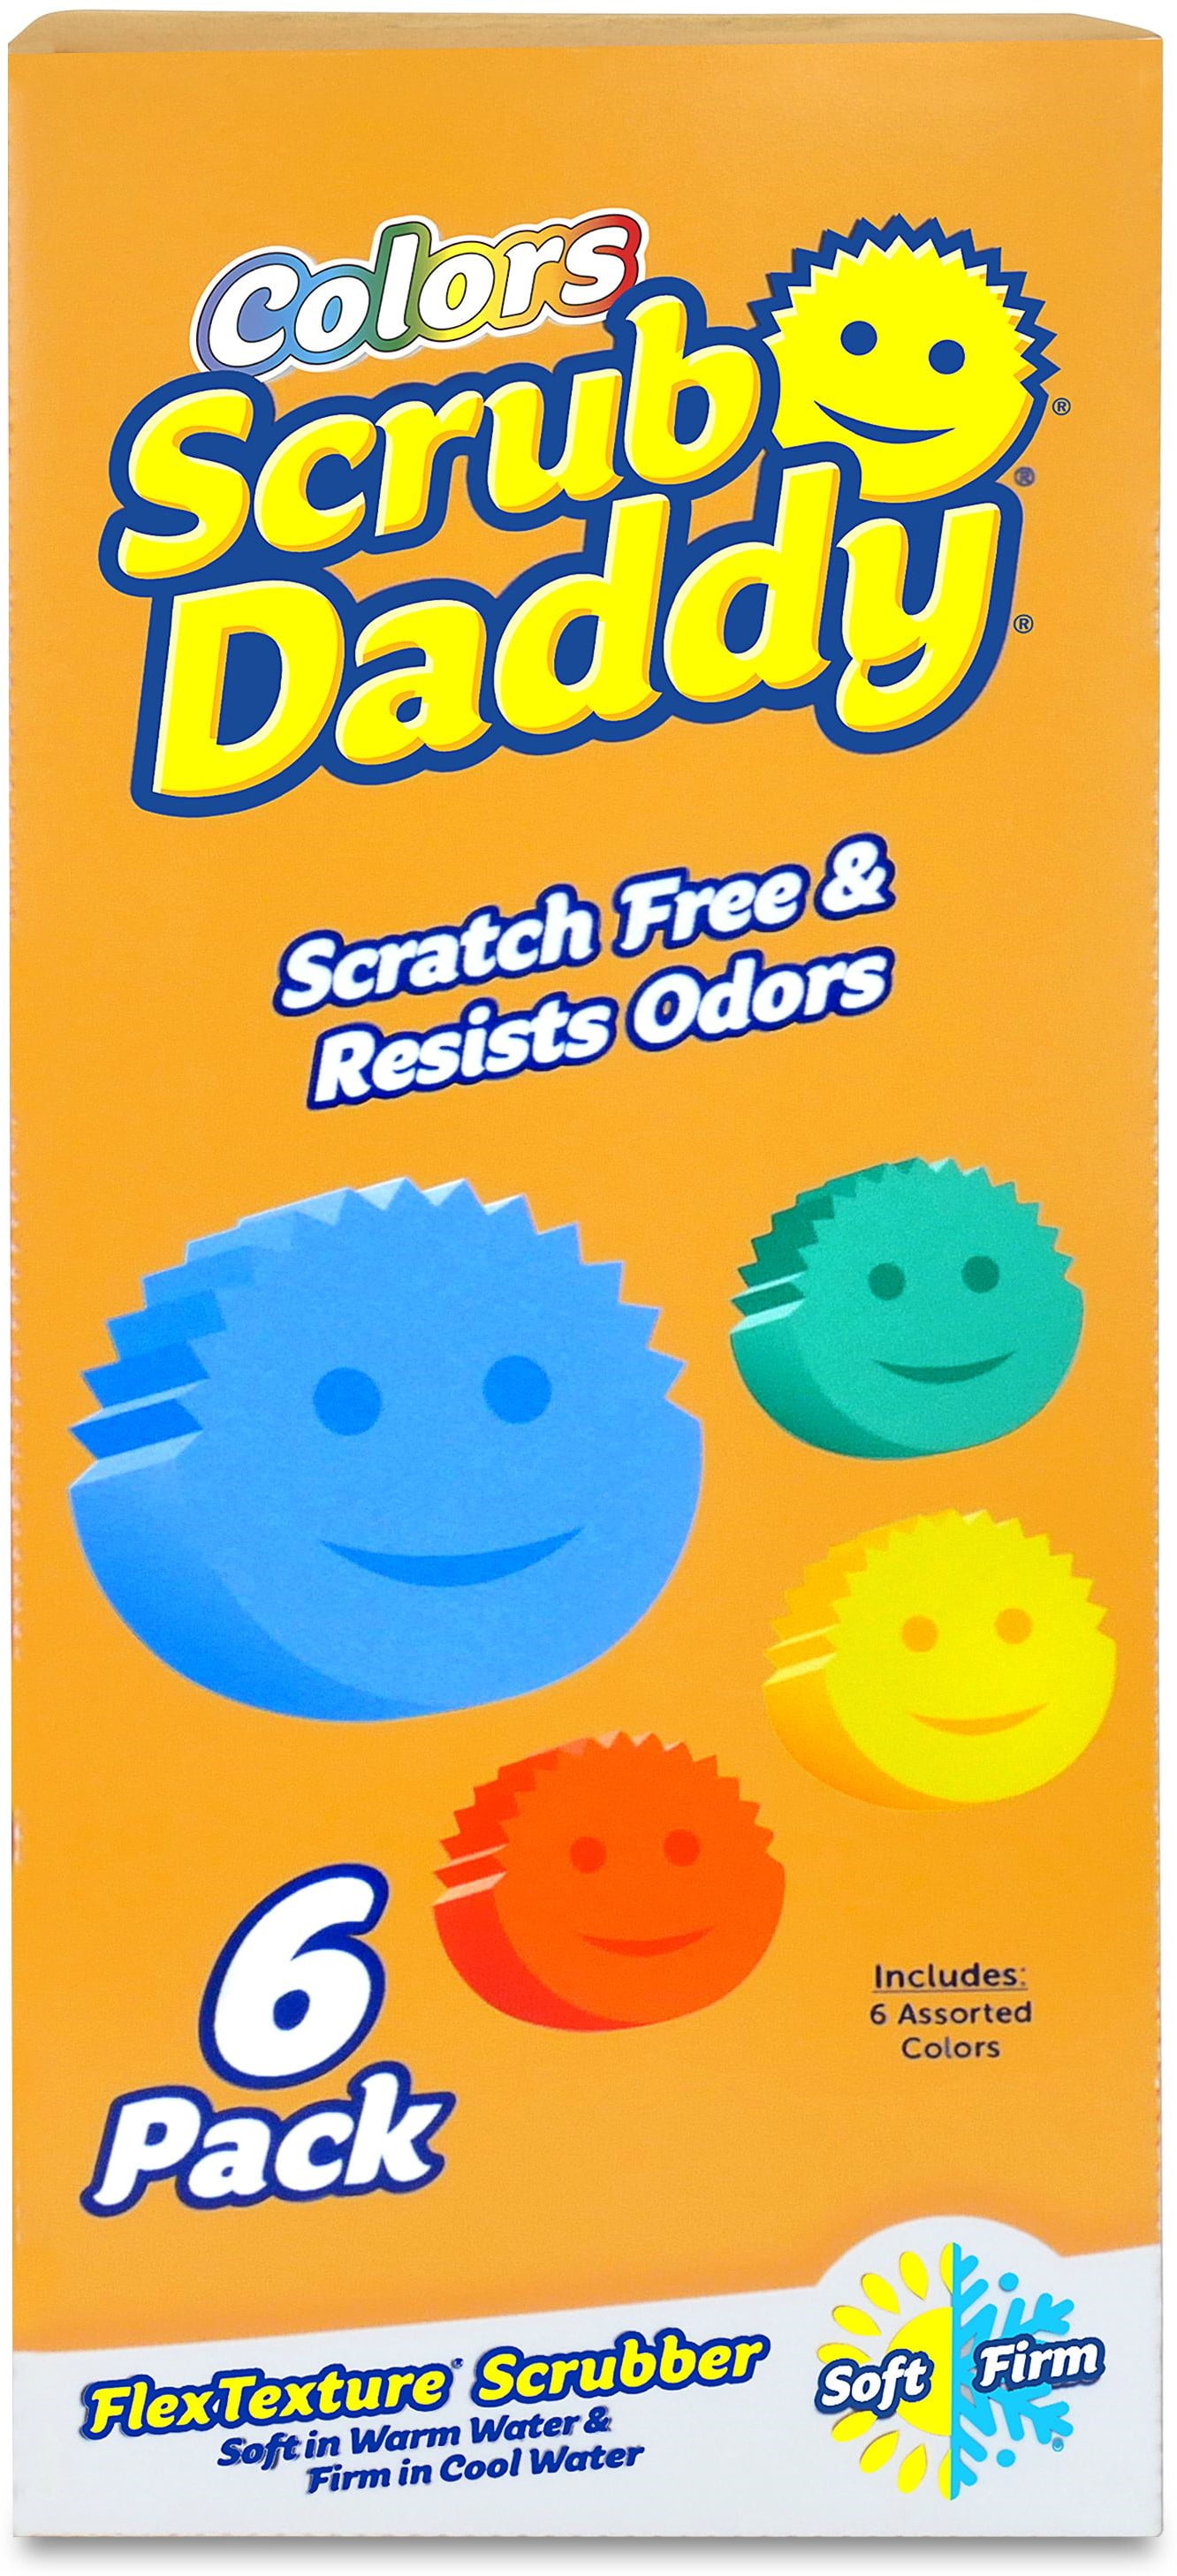 Walmart limited-edition Scrub Daddy Sponges: price, colors, and other  details explored